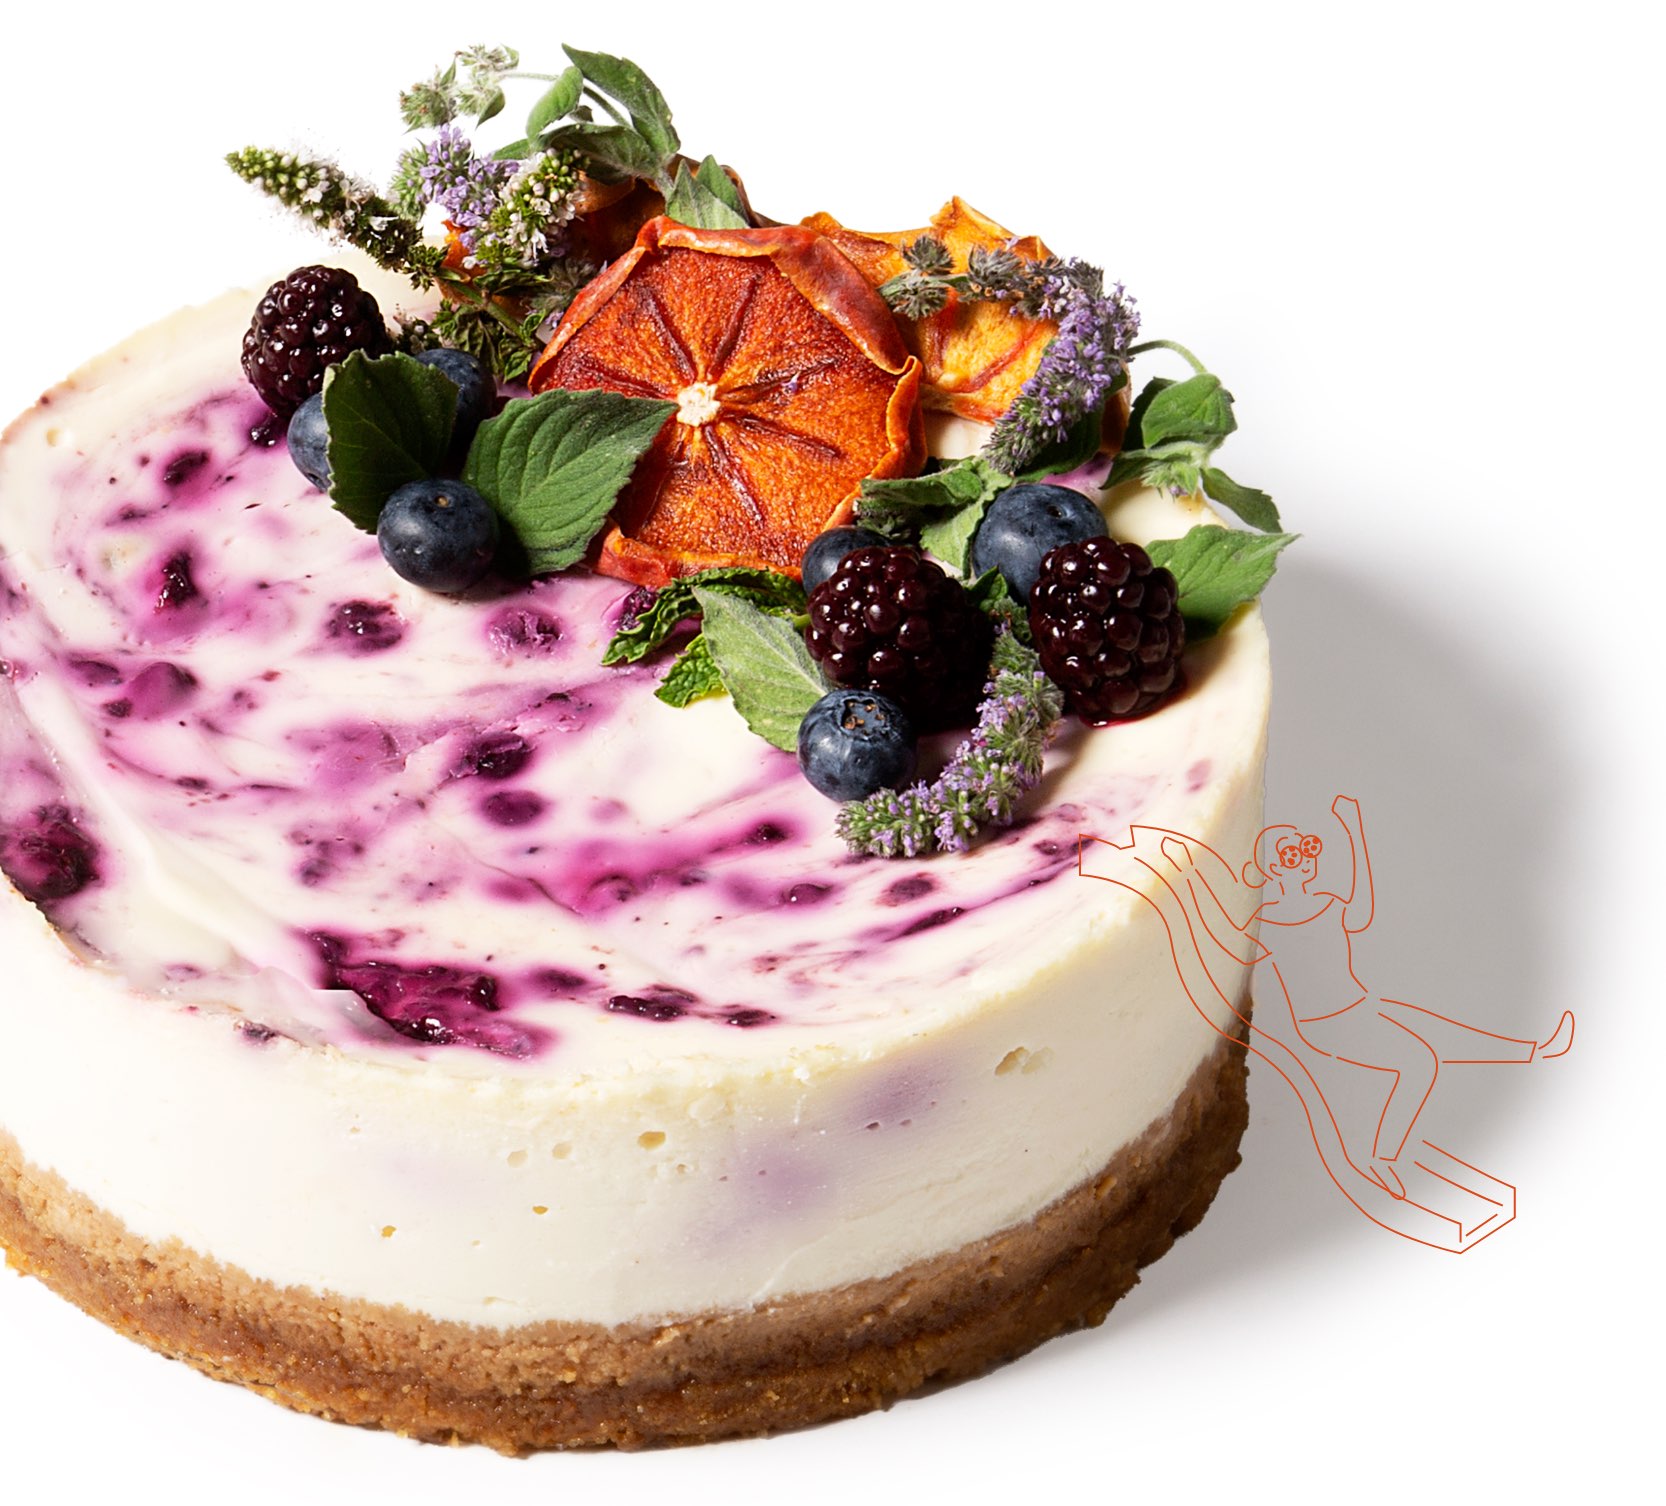 Product photography of cheesecake embellished with a brand illustration